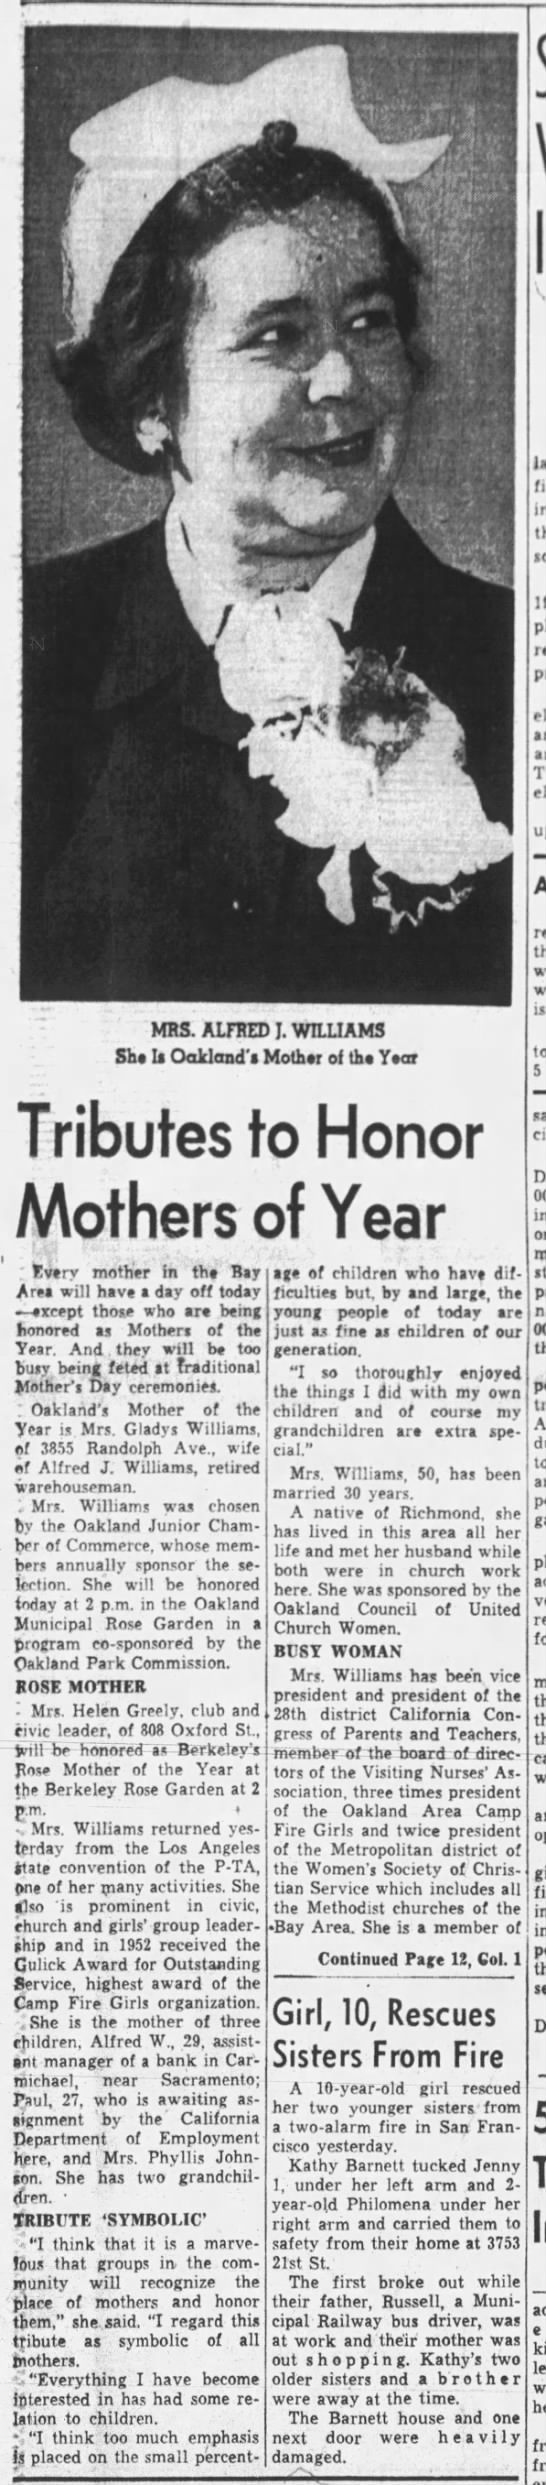 Mrs. Alfred Williams, Mother of the Year
Dr. Orley See added to Pioneer Walk p1 - 